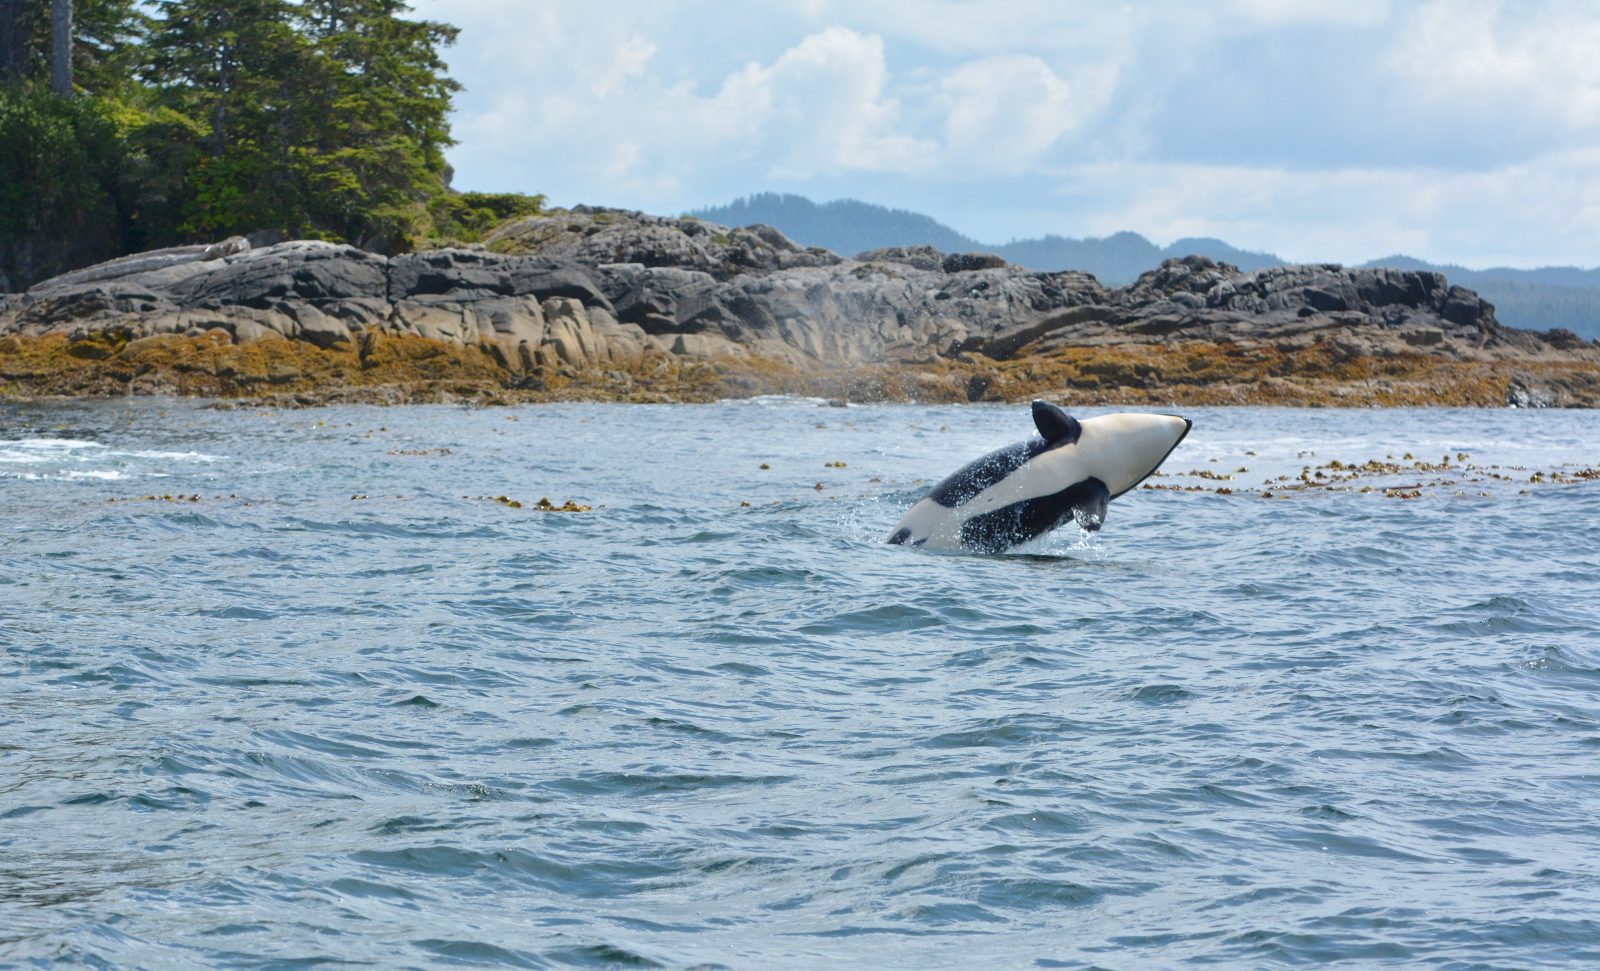 An orca jumps out of the water. A rocky shore appears in the distance.